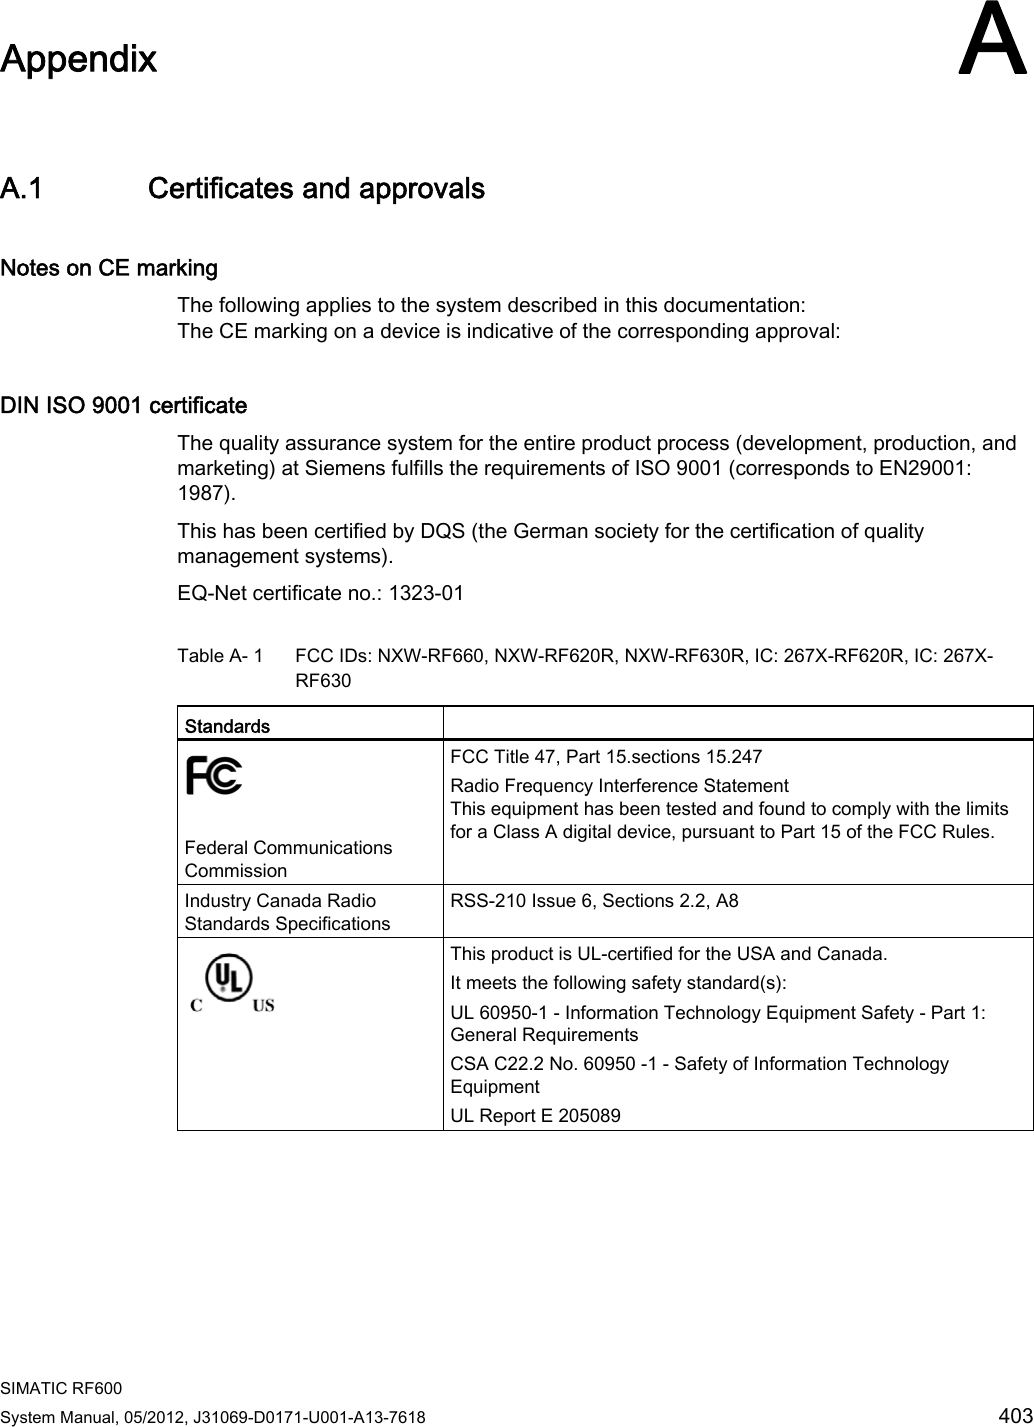  SIMATIC RF600 System Manual, 05/2012, J31069-D0171-U001-A13-7618  403 Appendix AA.1 Certificates and approvals Notes on CE marking The following applies to the system described in this documentation:  The CE marking on a device is indicative of the corresponding approval: DIN ISO 9001 certificate The quality assurance system for the entire product process (development, production, and marketing) at Siemens fulfills the requirements of ISO 9001 (corresponds to EN29001: 1987). This has been certified by DQS (the German society for the certification of quality management systems). EQ-Net certificate no.: 1323-01 Table A- 1  FCC IDs: NXW-RF660, NXW-RF620R, NXW-RF630R, IC: 267X-RF620R, IC: 267X-RF630 Standards     Federal Communications Commission  FCC Title 47, Part 15.sections 15.247 Radio Frequency Interference Statement  This equipment has been tested and found to comply with the limits for a Class A digital device, pursuant to Part 15 of the FCC Rules.  Industry Canada Radio Standards Specifications RSS-210 Issue 6, Sections 2.2, A8  This product is UL-certified for the USA and Canada. It meets the following safety standard(s):  UL 60950-1 - Information Technology Equipment Safety - Part 1: General Requirements CSA C22.2 No. 60950 -1 - Safety of Information Technology Equipment UL Report E 205089 